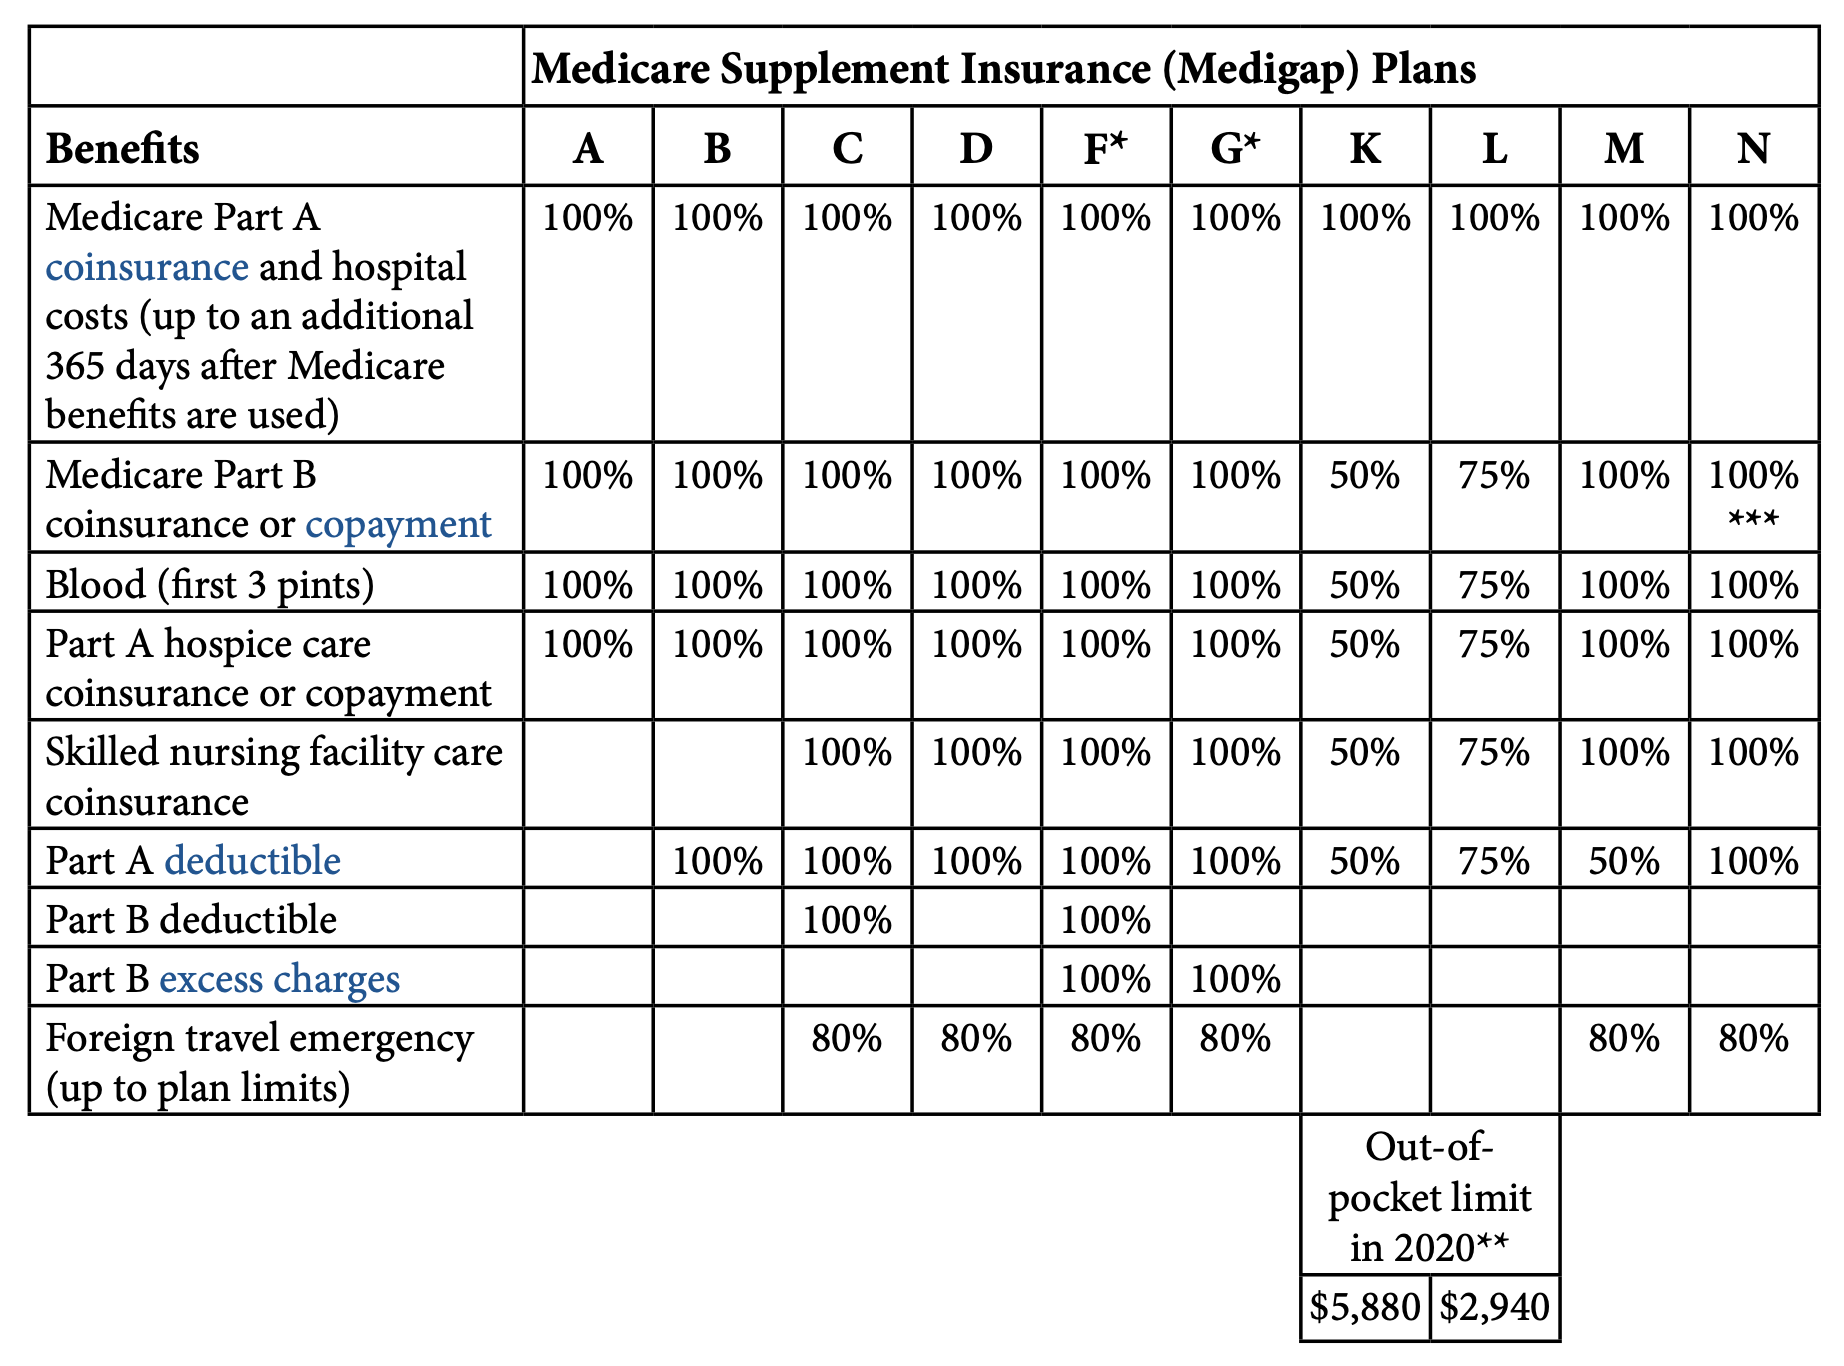 Medicare Supplement - Accurate Health Plans